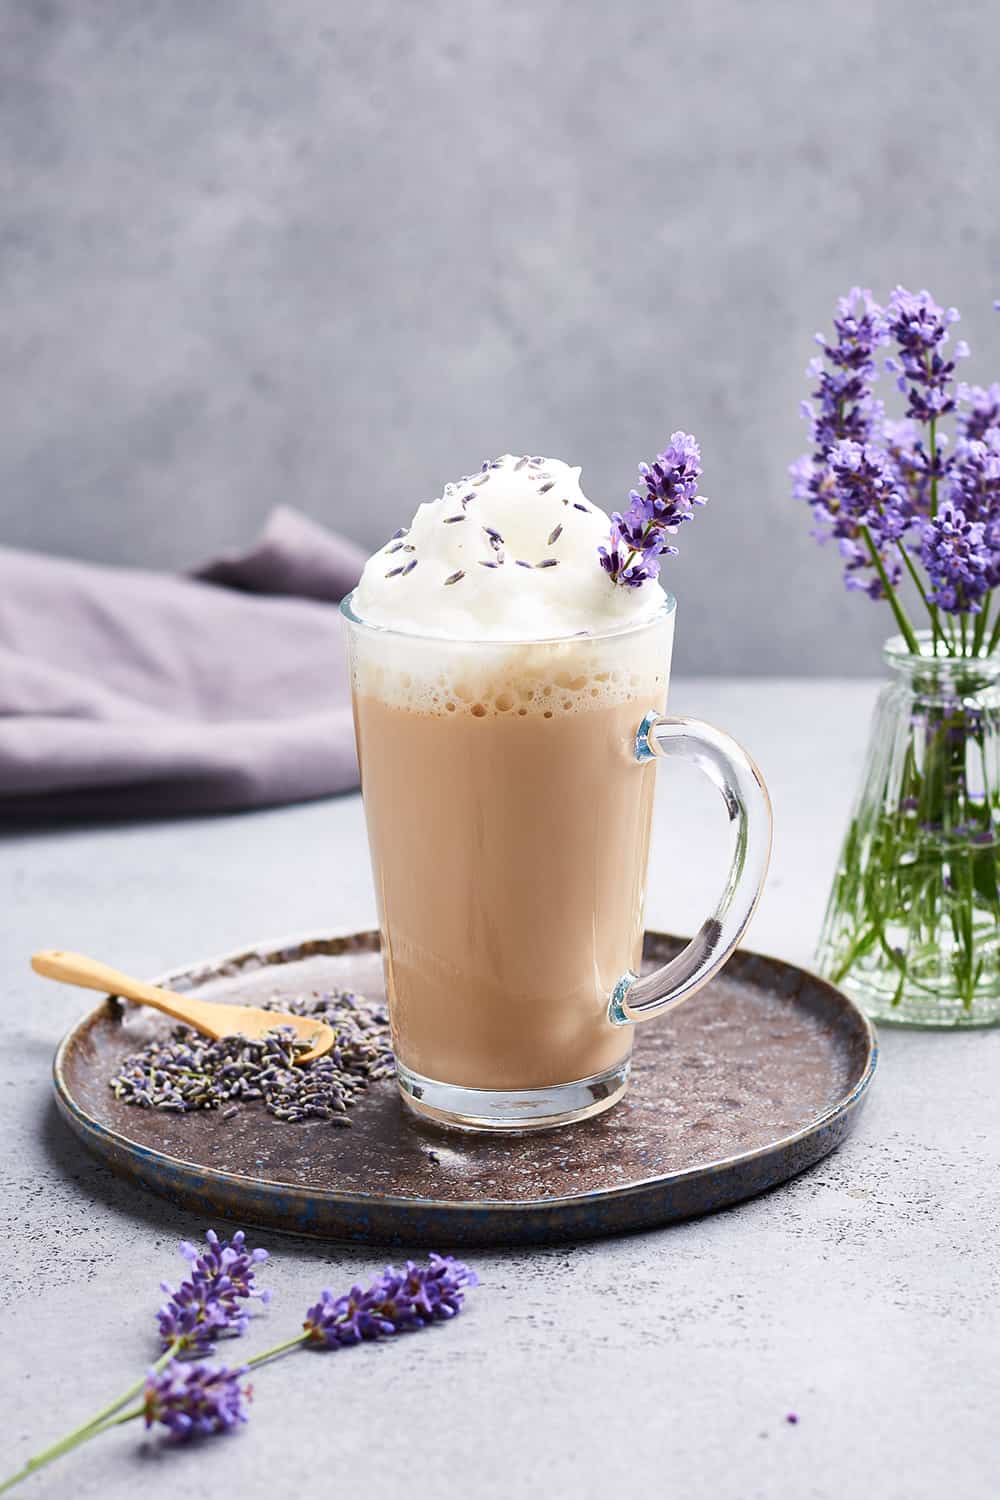 How to Make a Lavender Latte